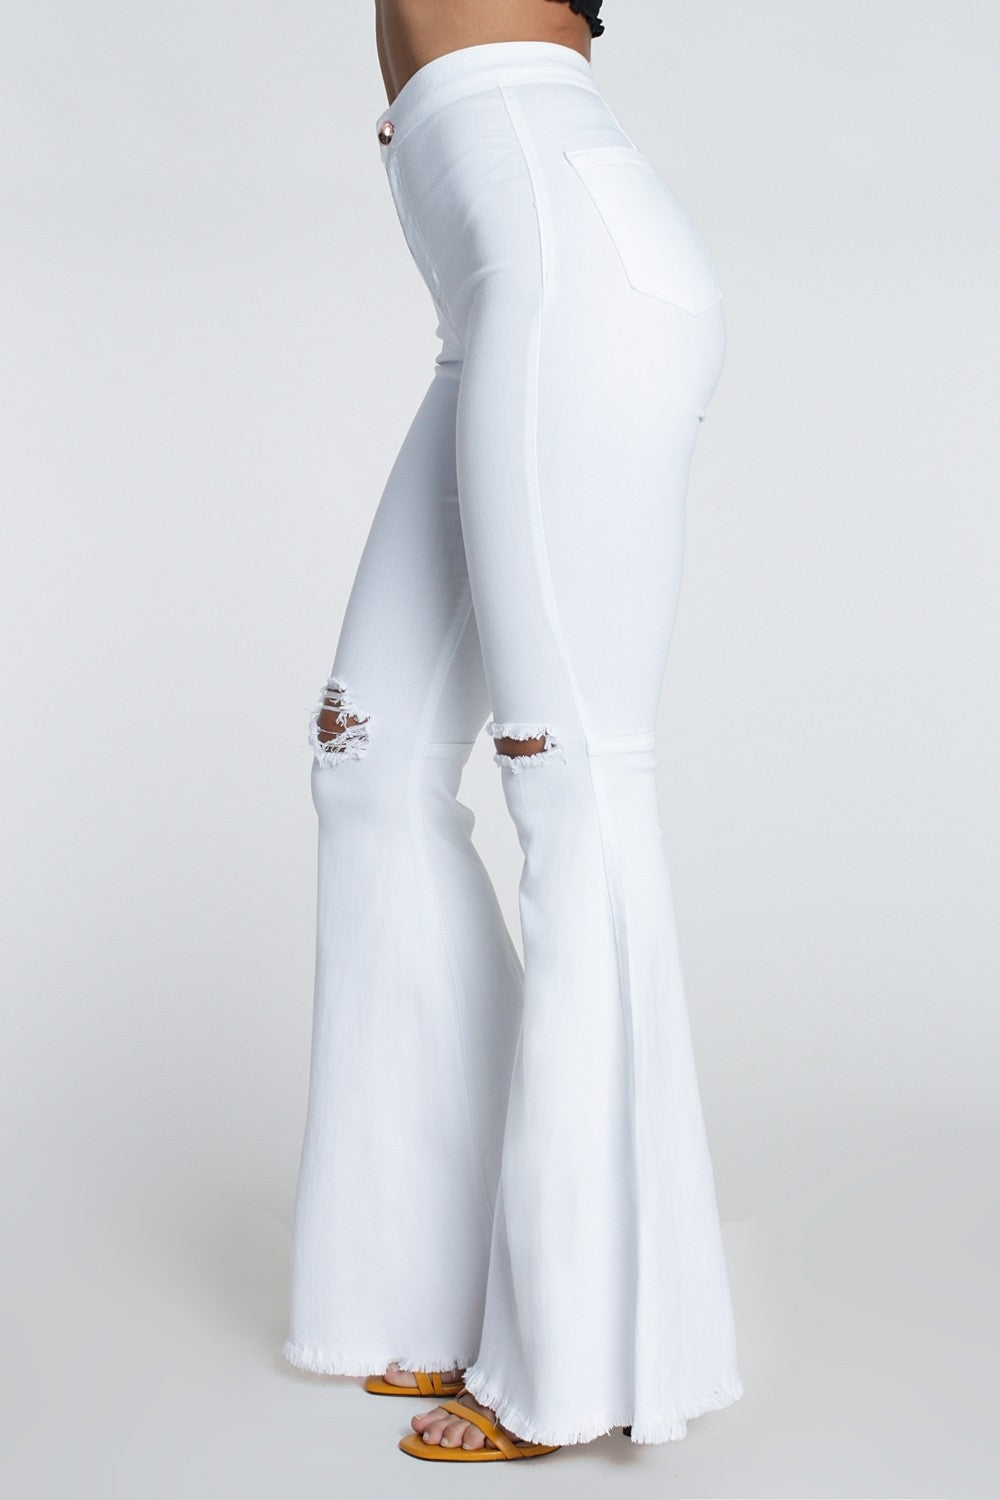 White Stretch Flare Jeans